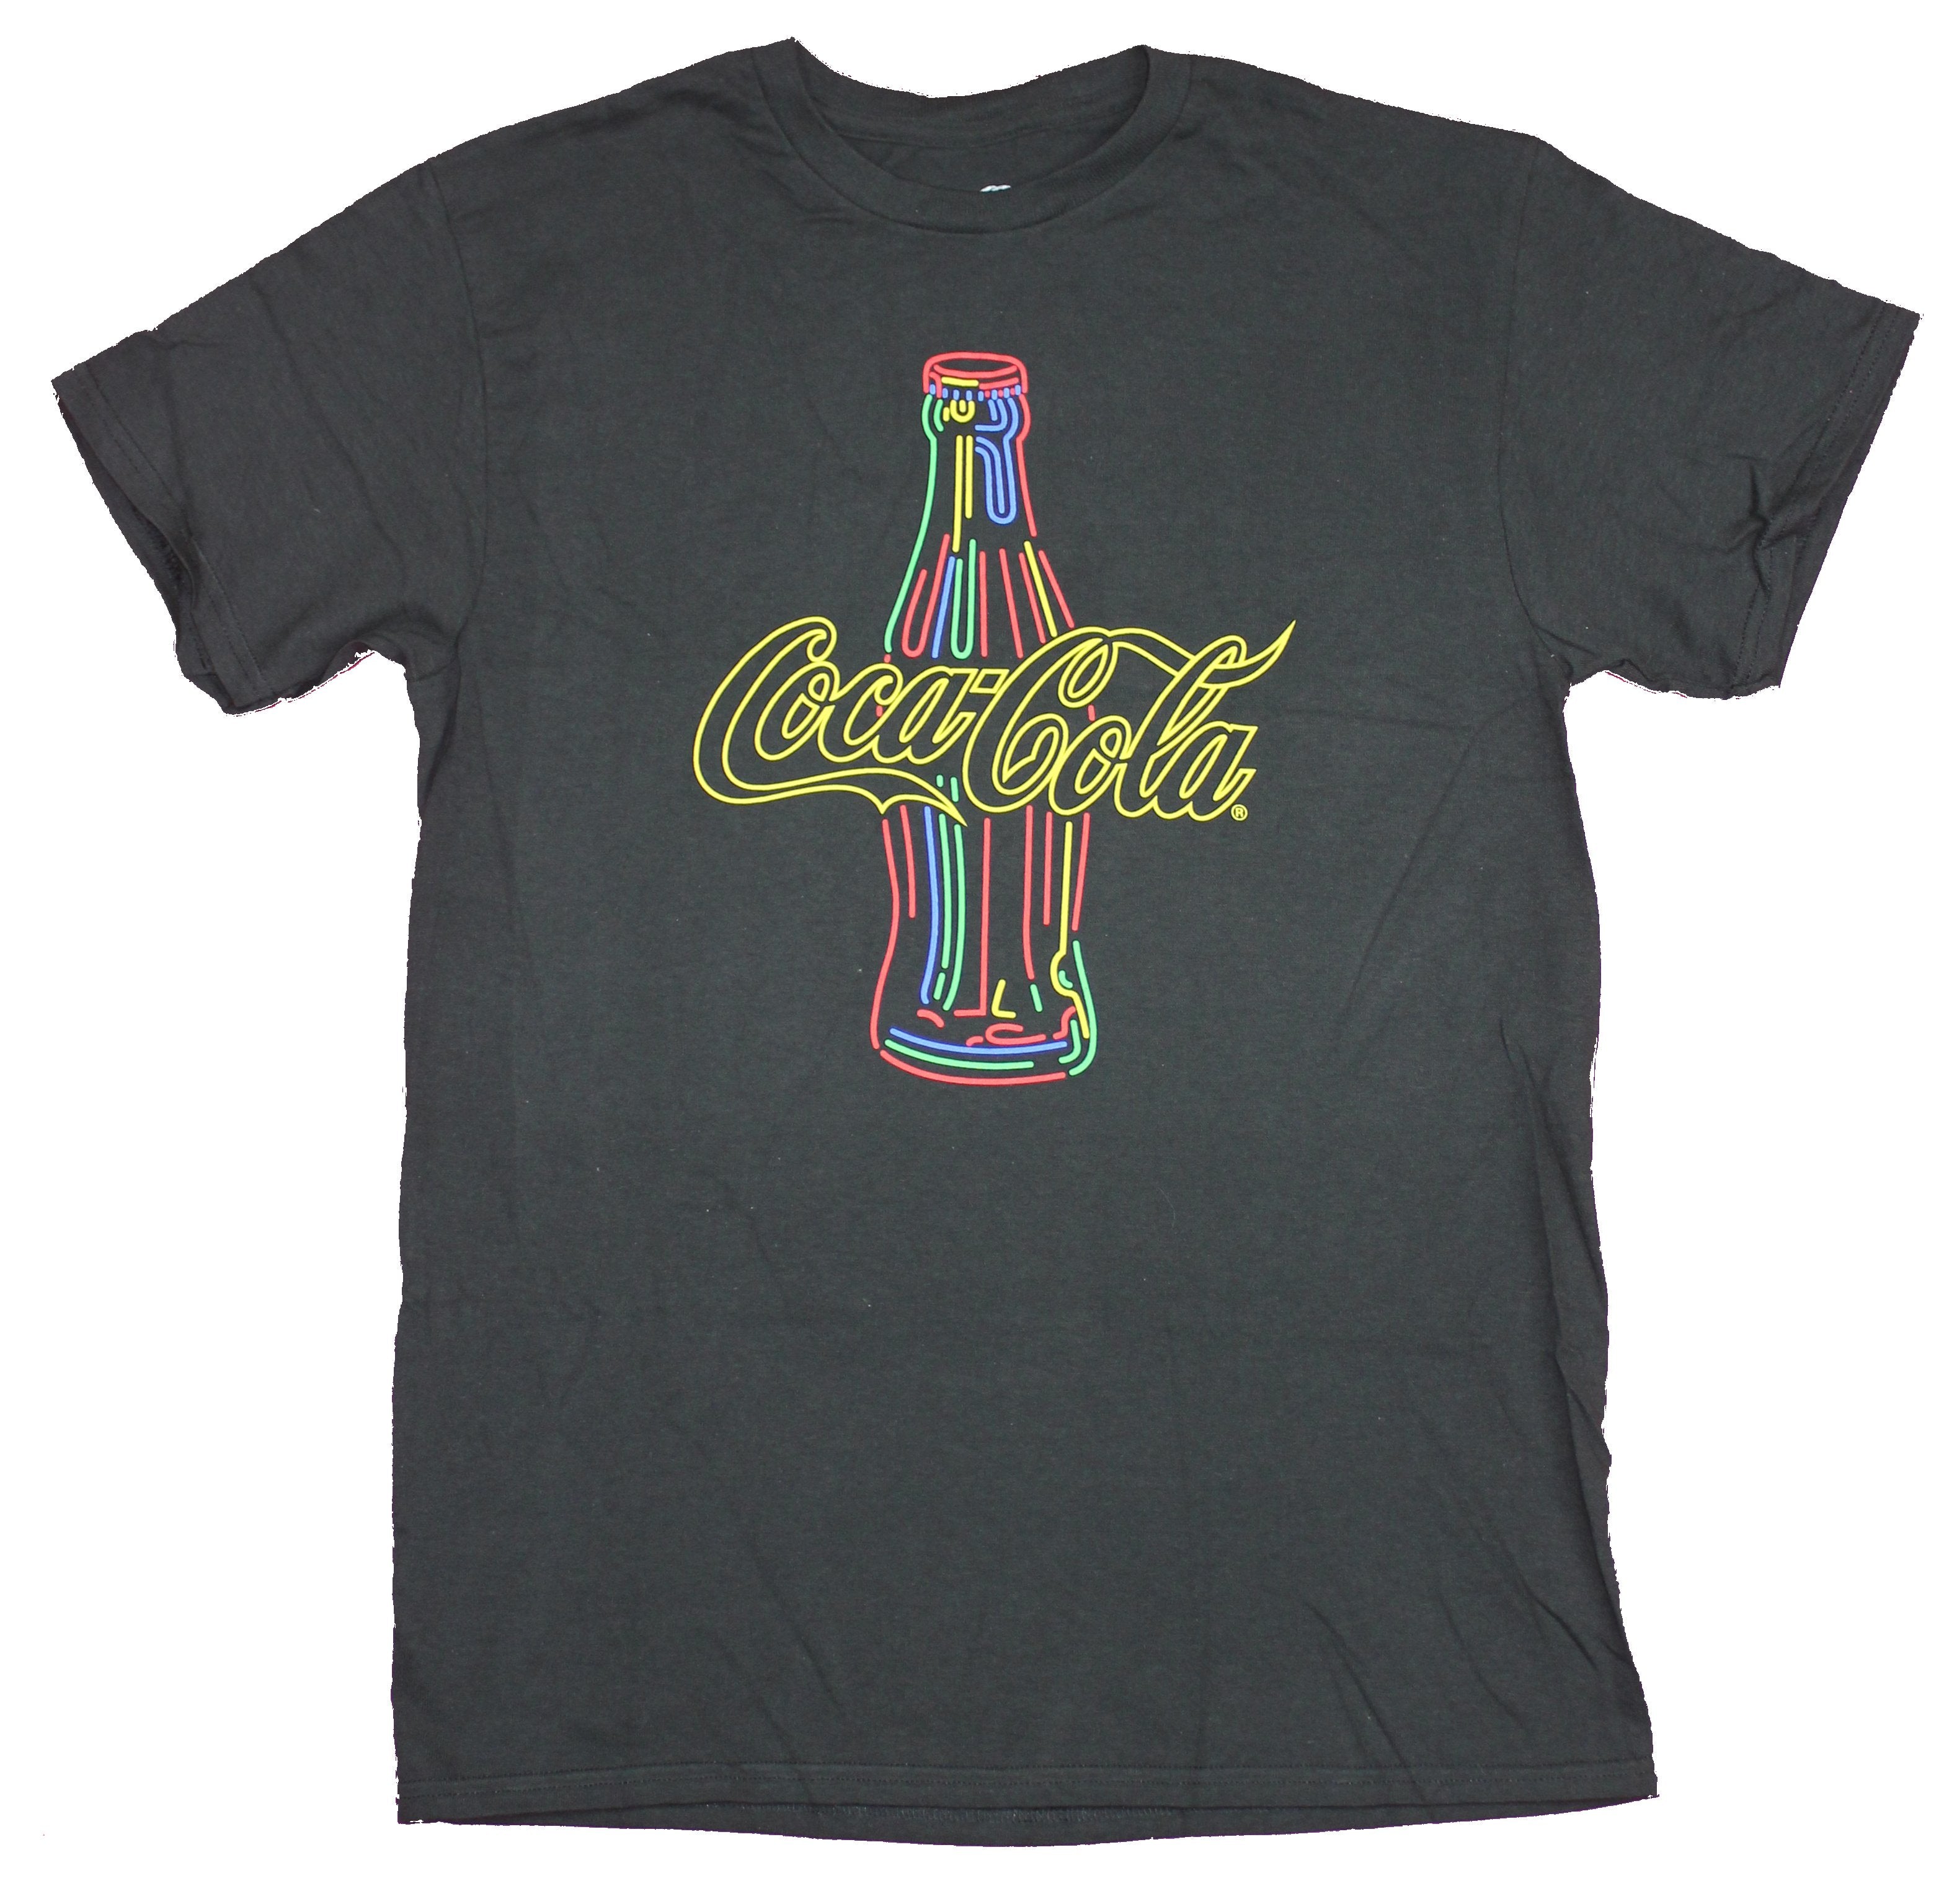 Coca Cola Mens T-Shirt  - Neon Styled Colorful Coke Bottle Image